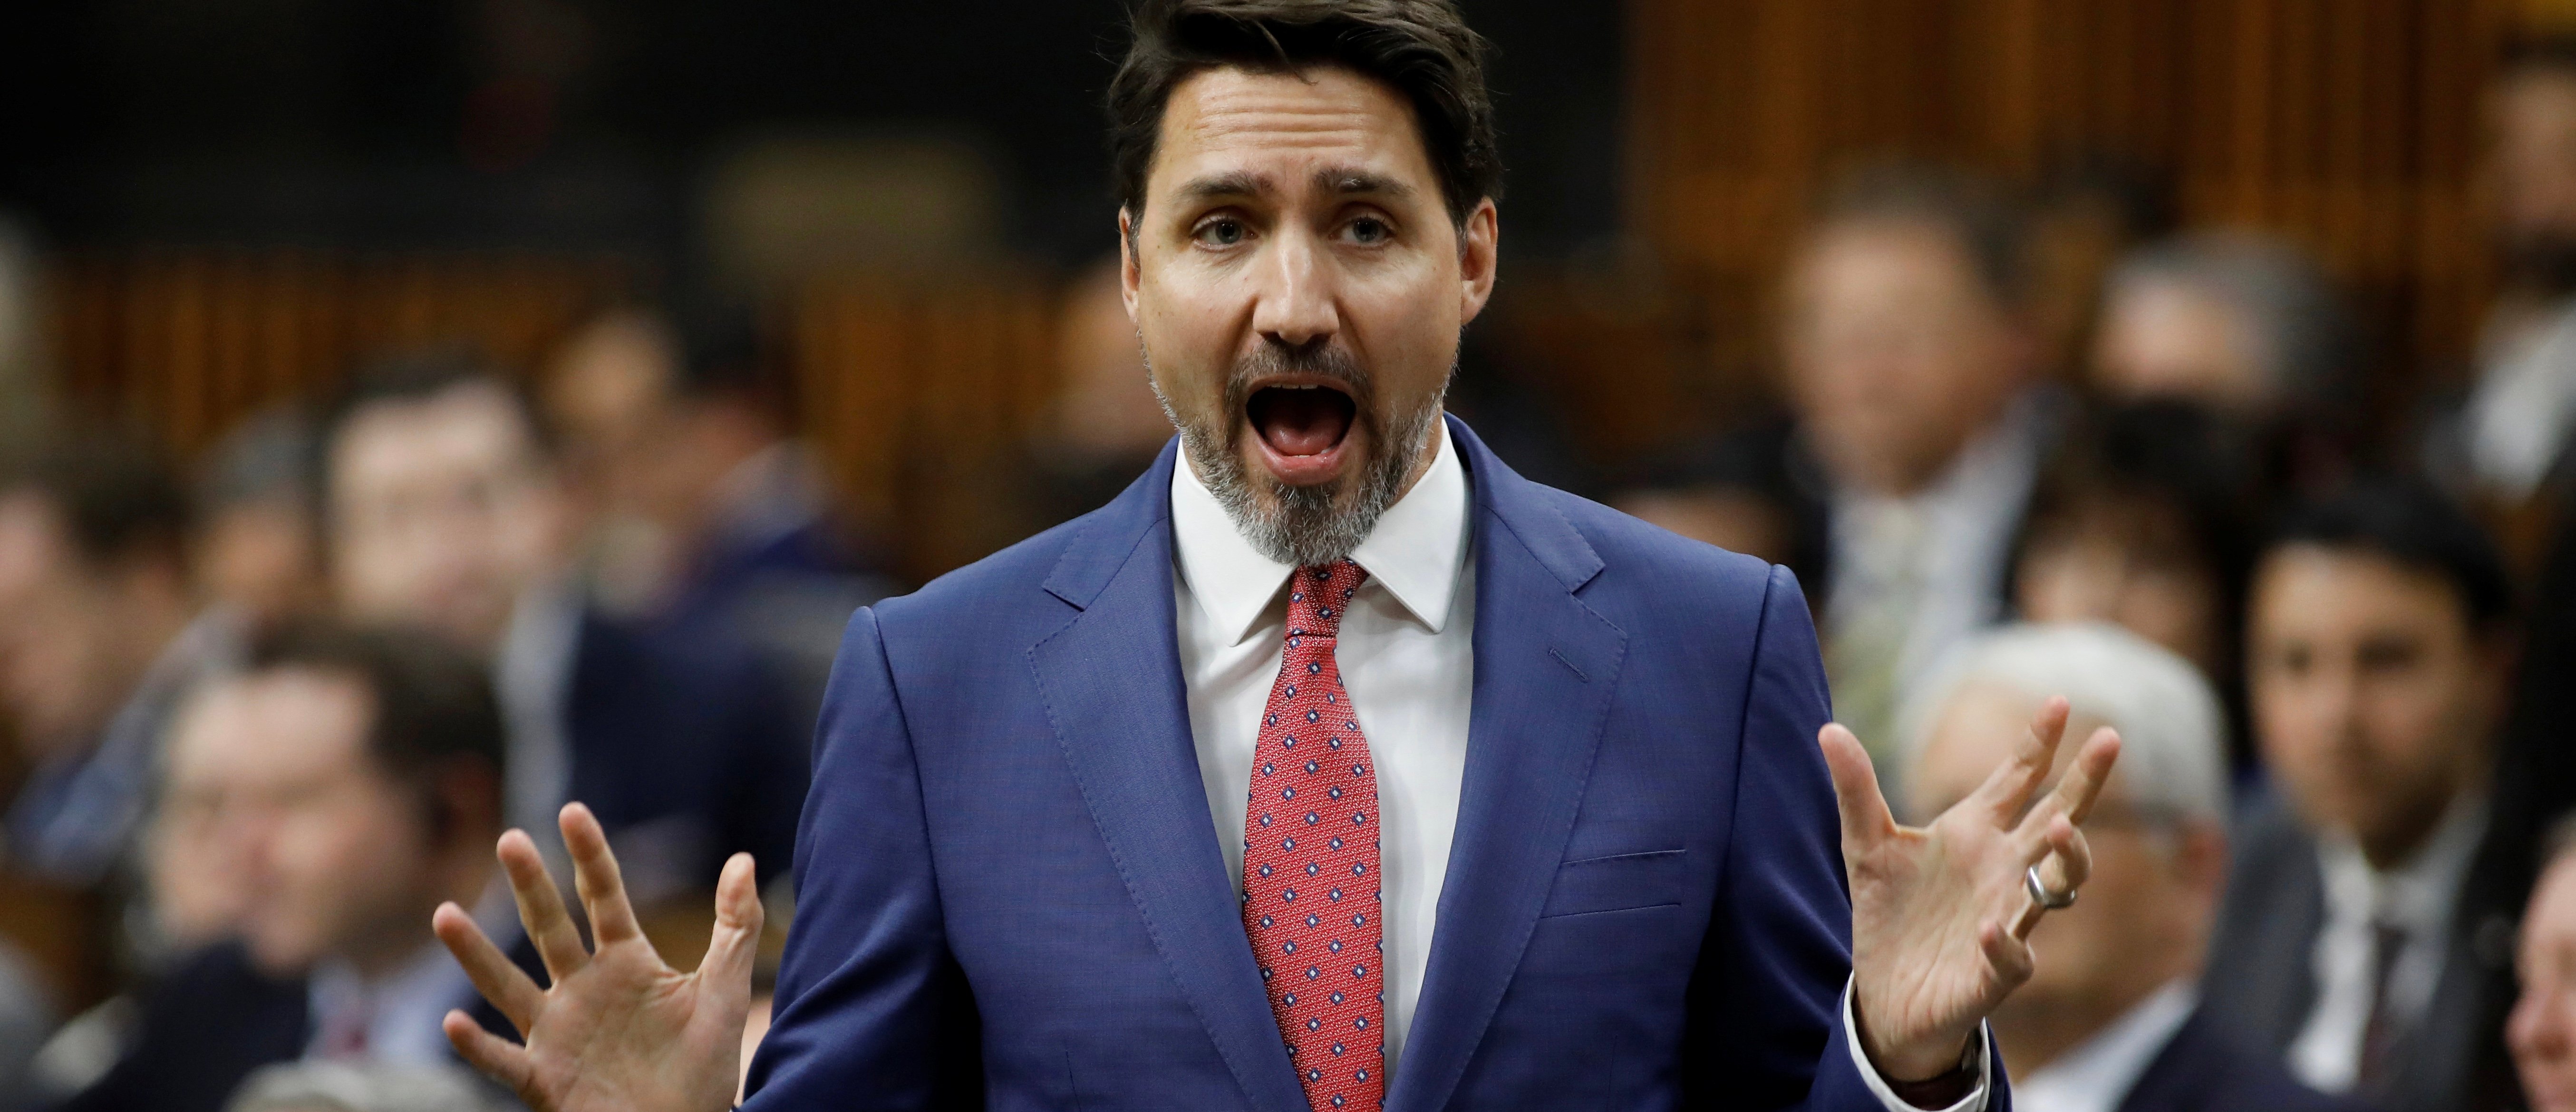 Canada's Prime Minister Justin Trudeau speaks during Question Period in the House of Commons on Parliament Hill in Ottawa, Ontario, Canada February 3, 2020. REUTERS/Blair Gable